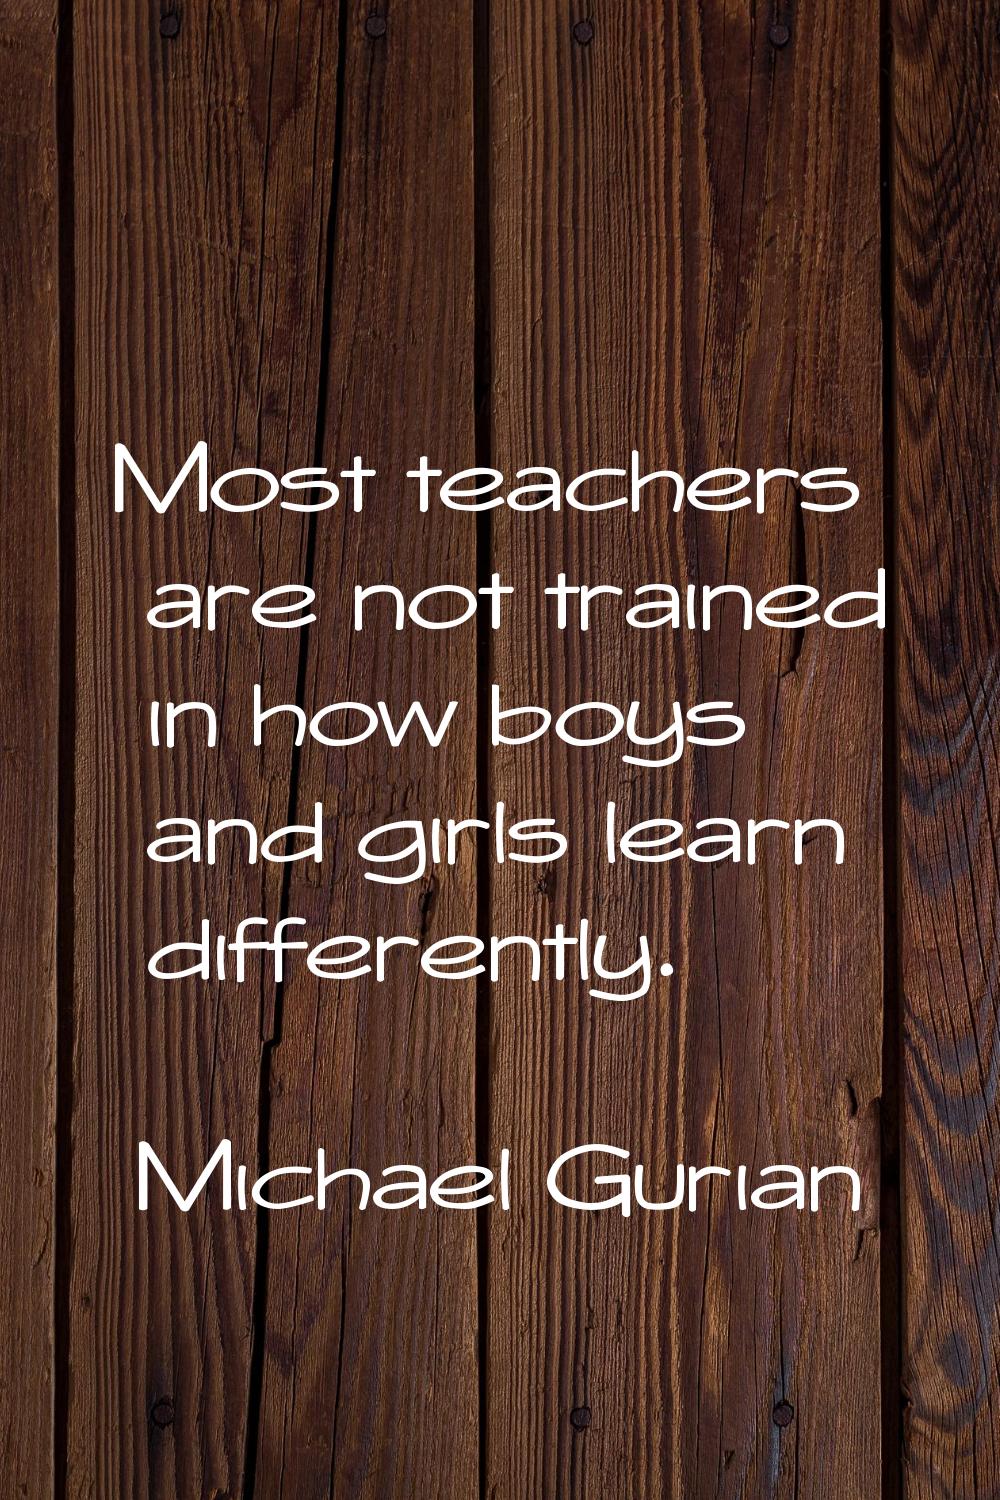 Most teachers are not trained in how boys and girls learn differently.